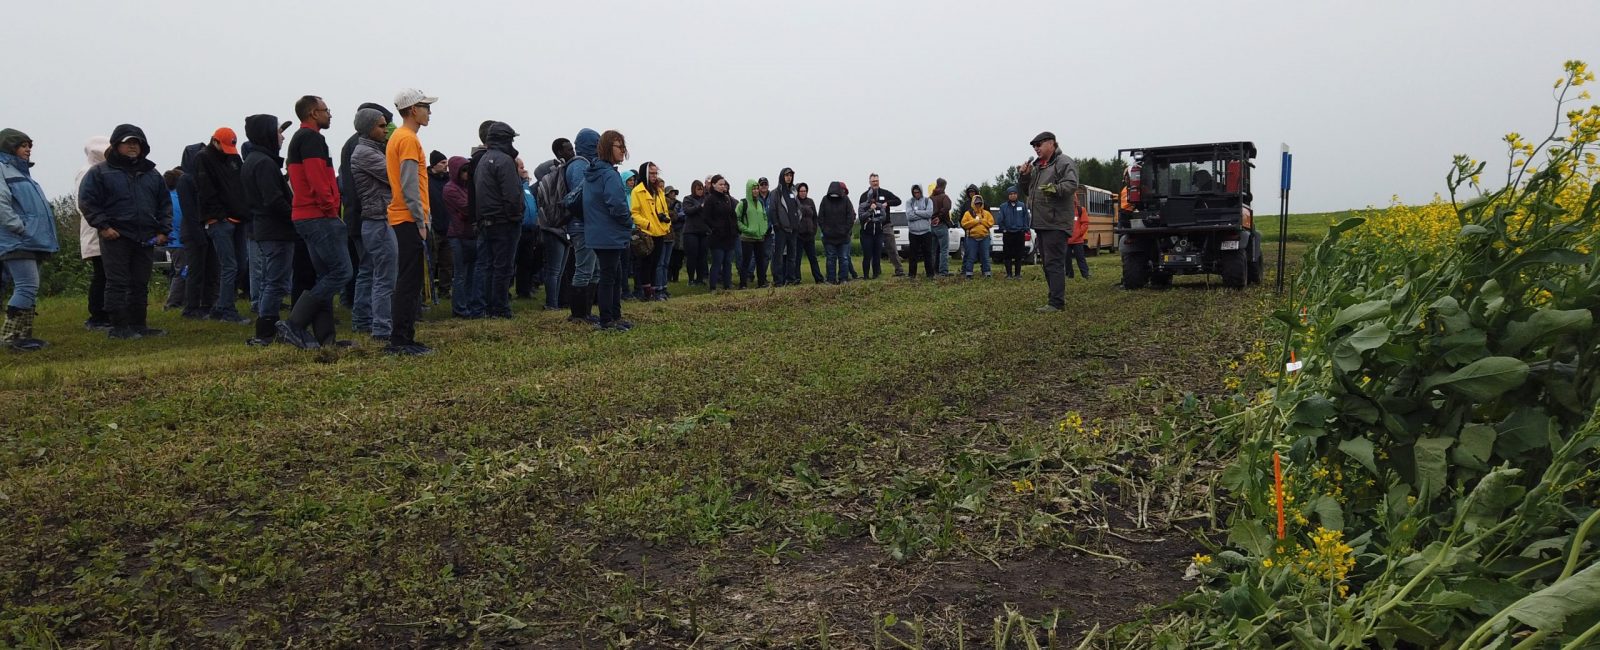 A group of people standing in a field listening to a speaker